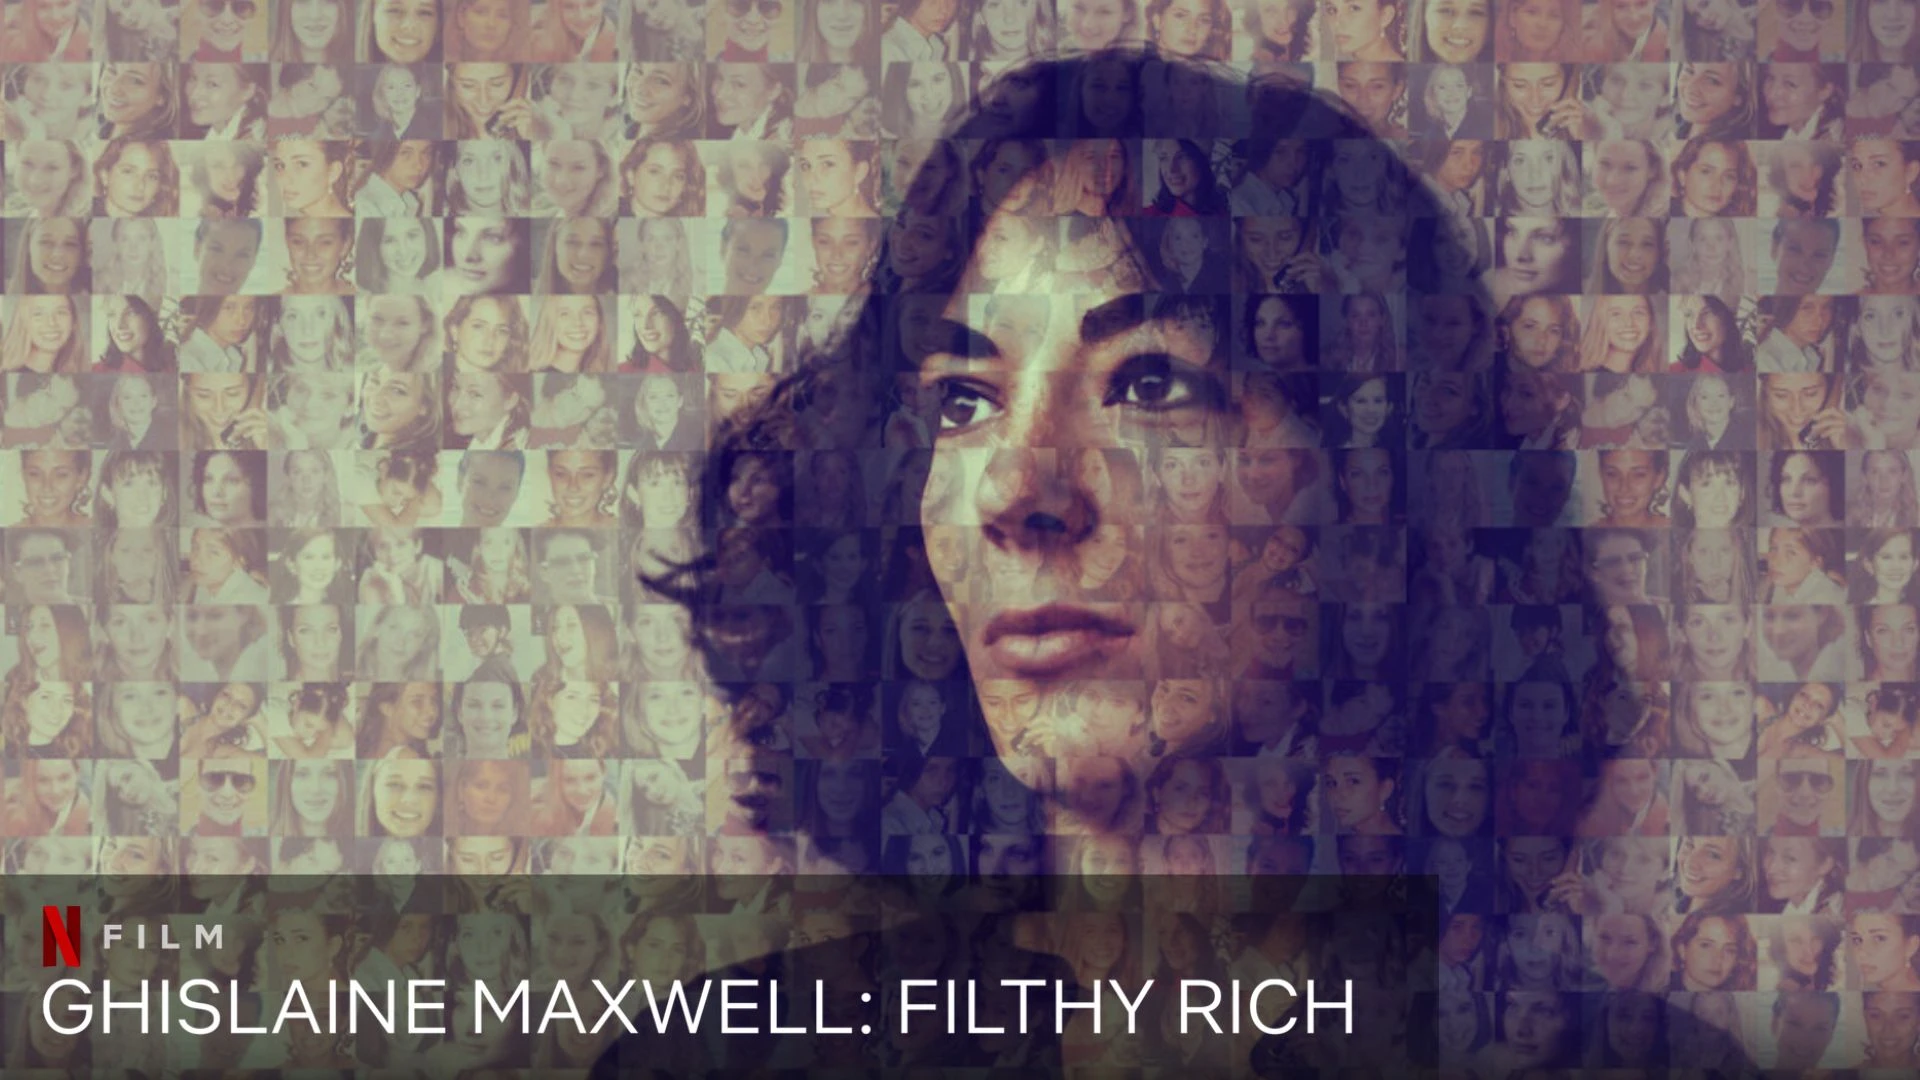 Ghislaine Maxwell: Filthy Rich Parents Guide | Age Rating